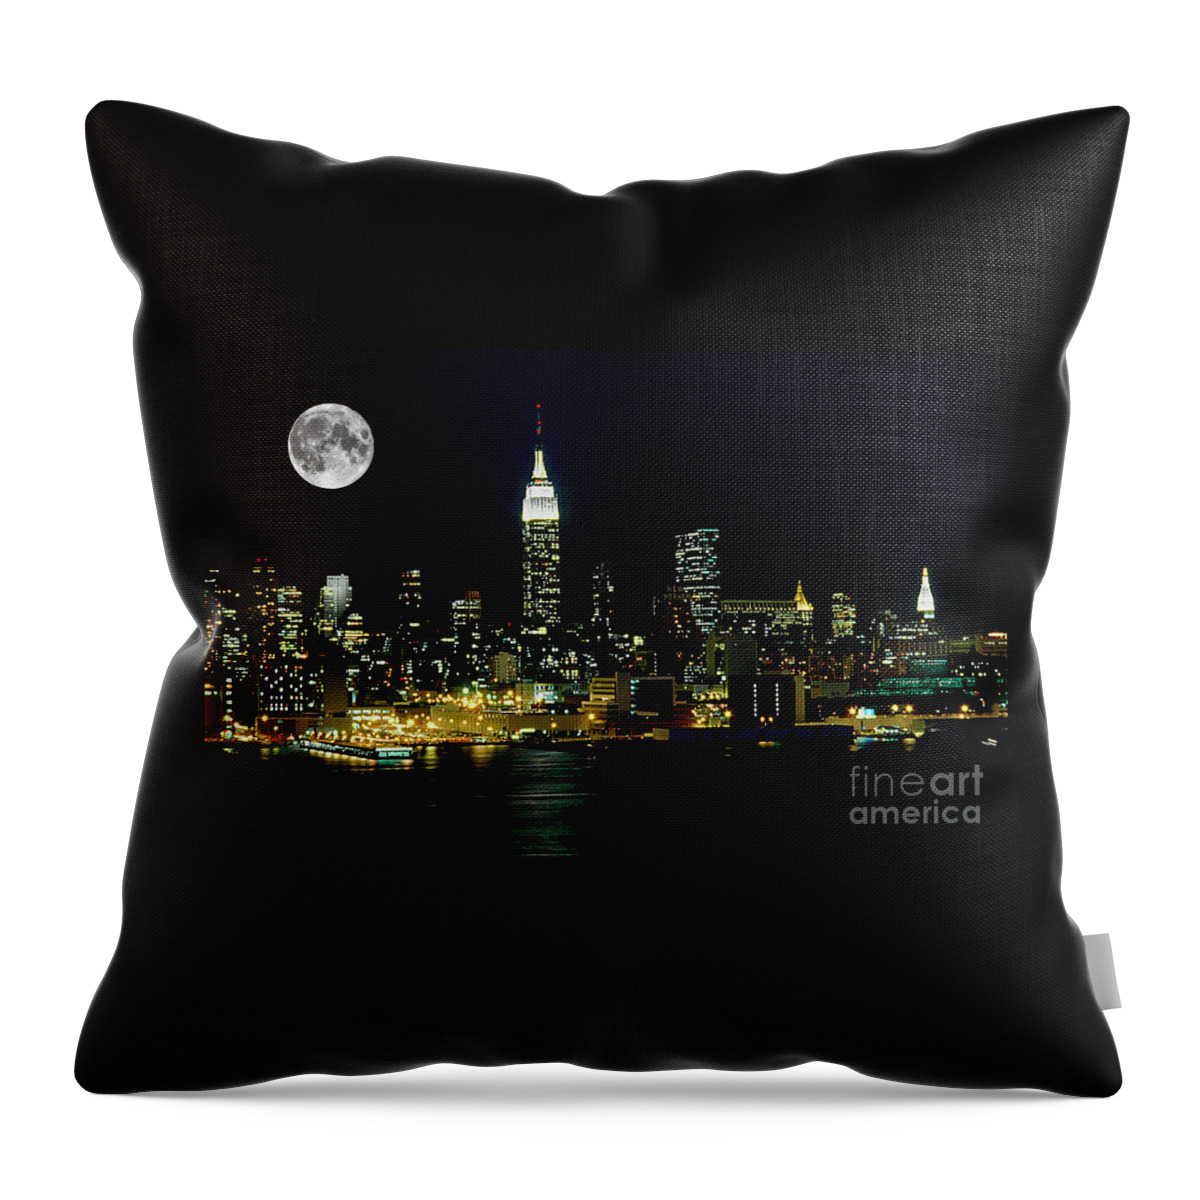 Nyc Throw Pillow featuring the photograph Full Moon Rising - New York City by Anthony Sacco